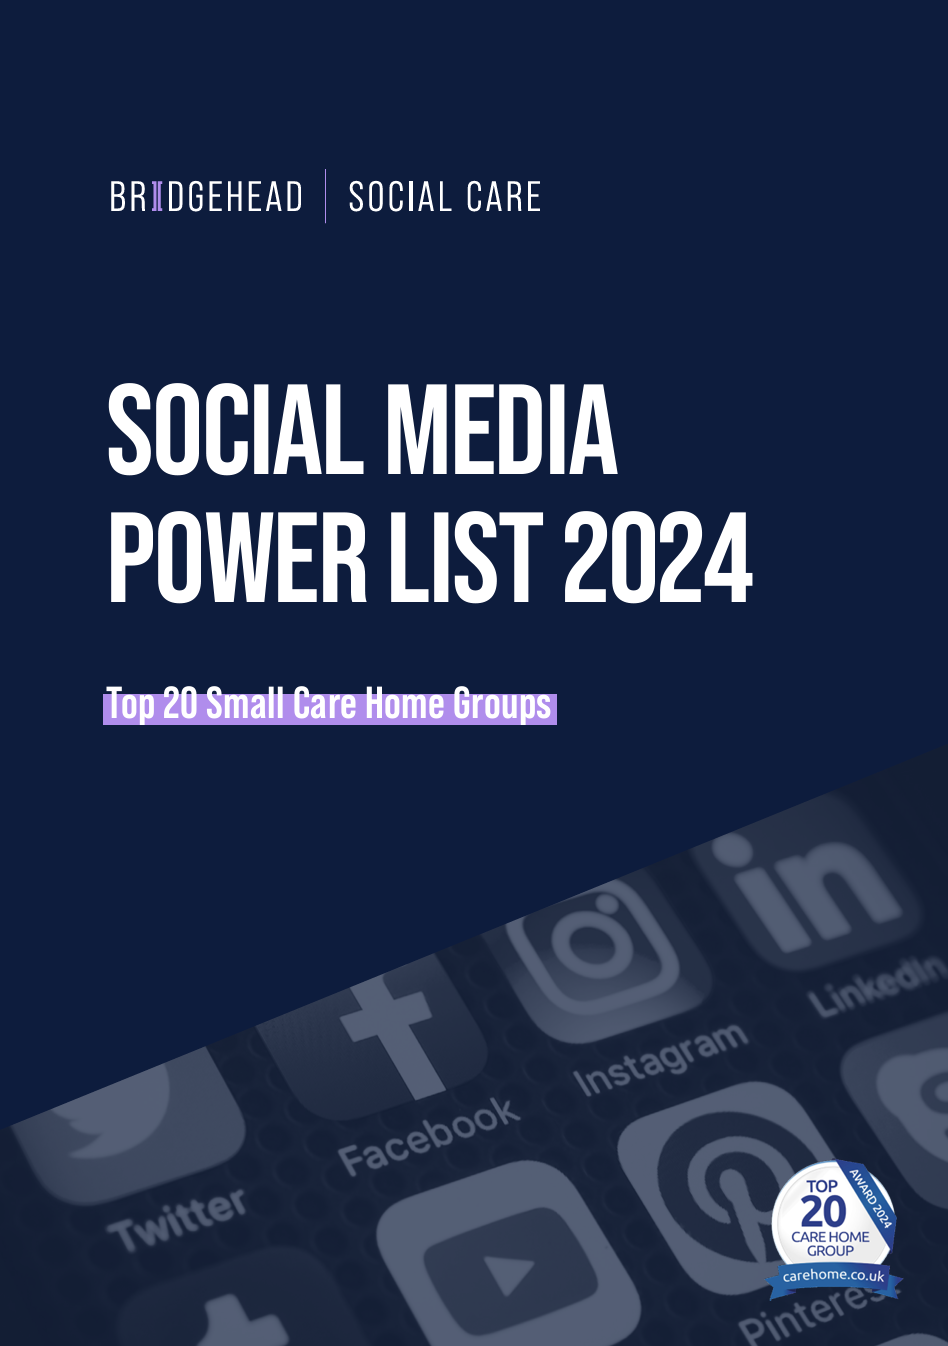 Social Media Power List 2024 - Top 20 Small Care Home Groups